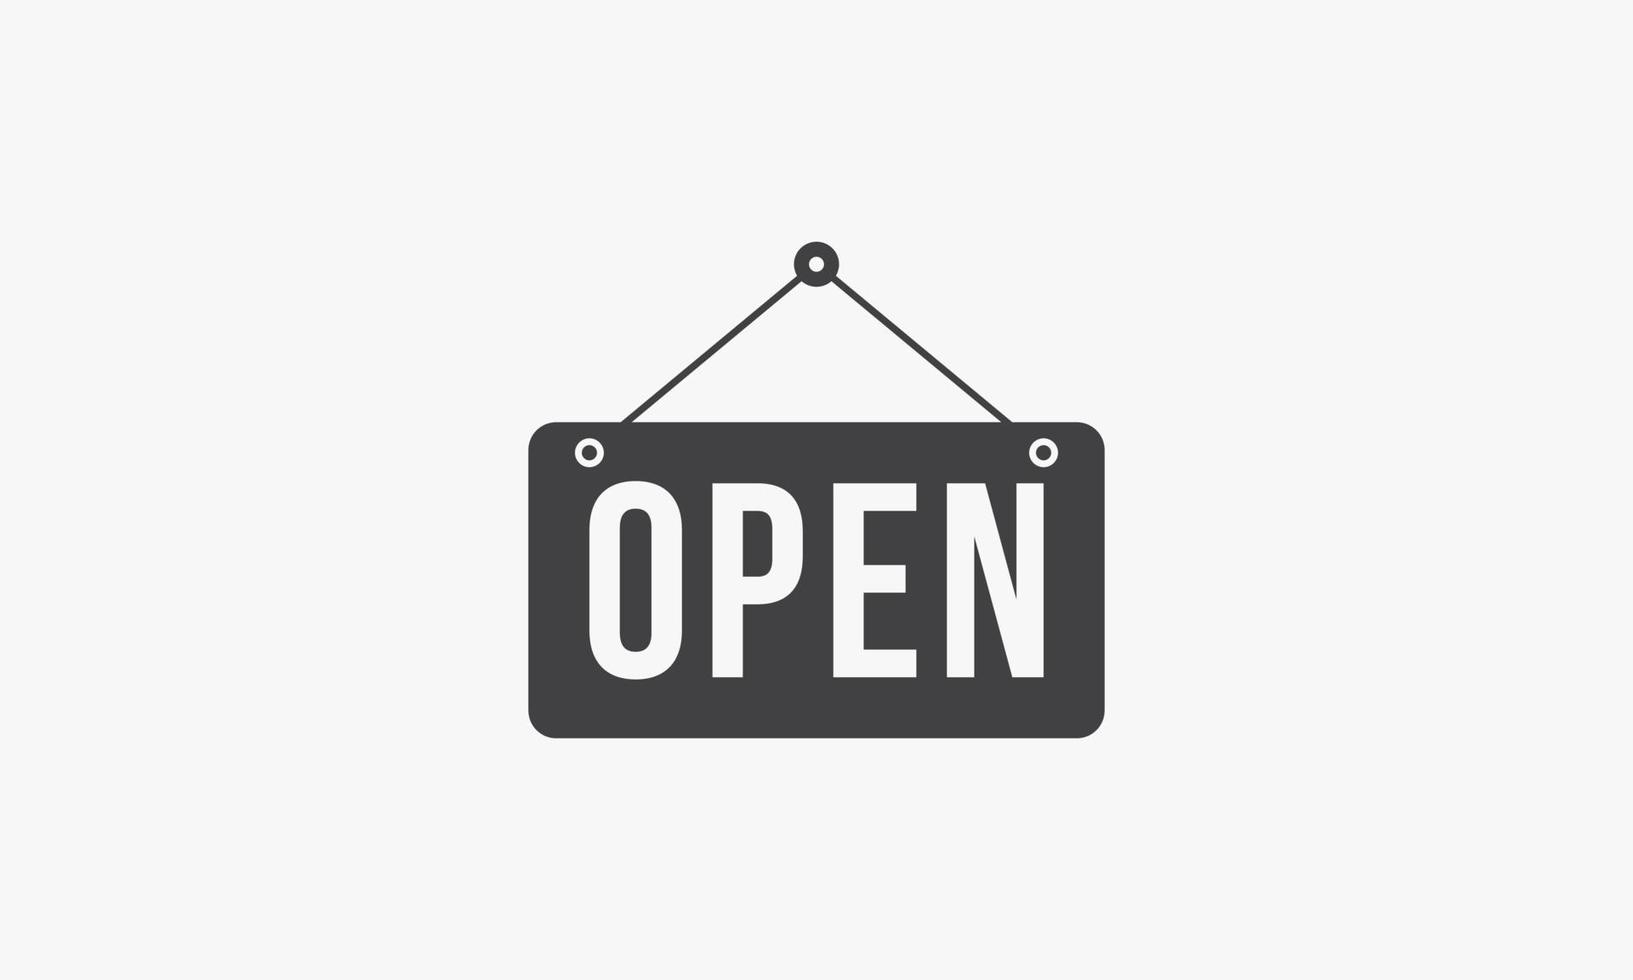 open signboard hanging. vector illustration. isolated on white background.